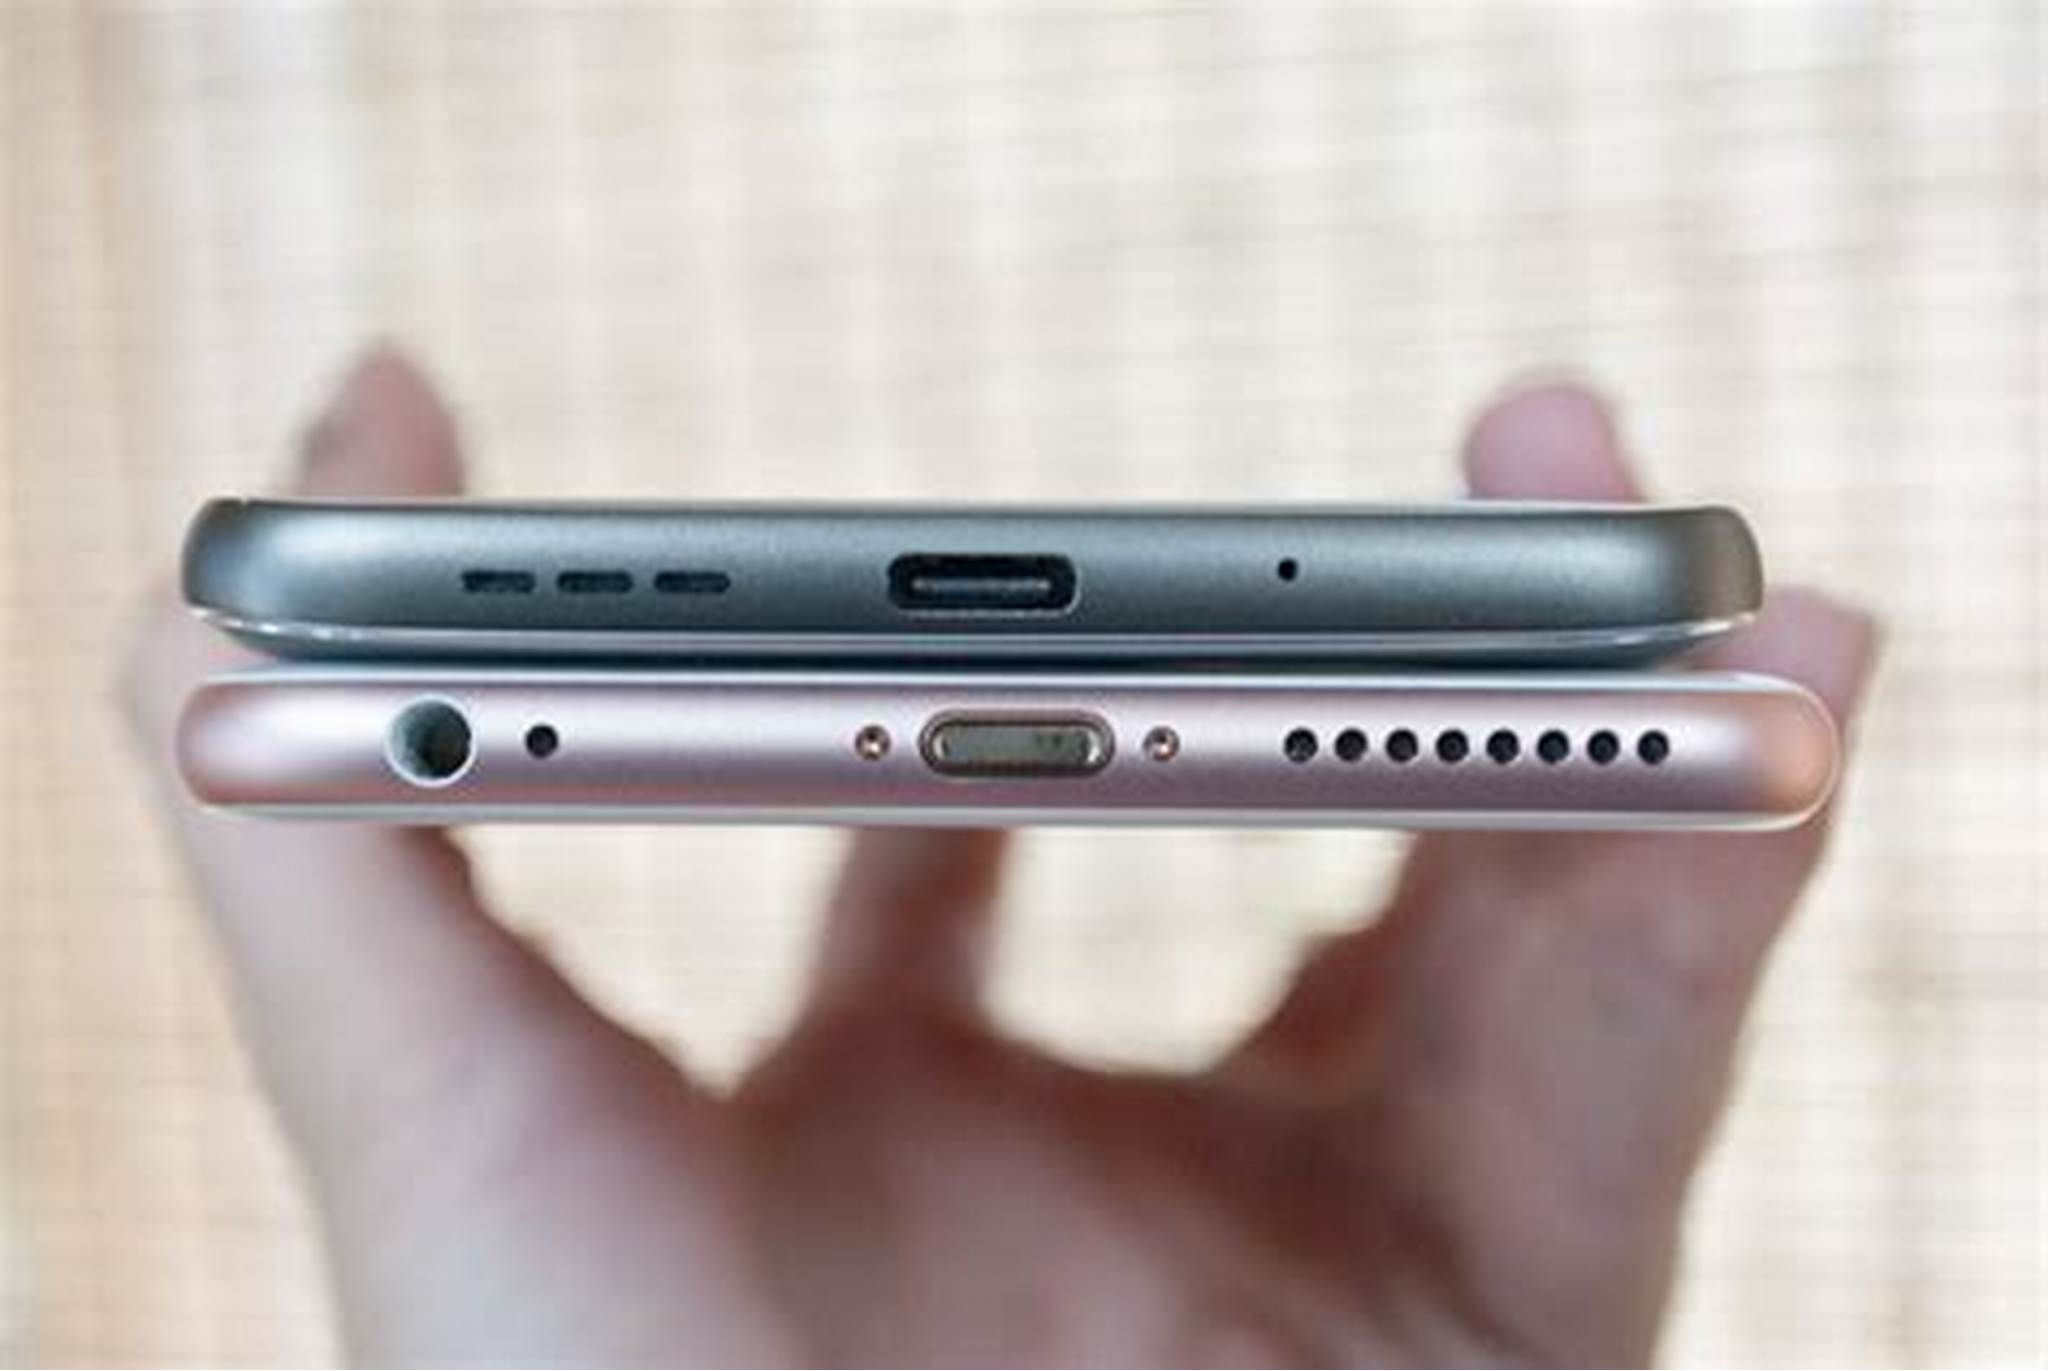 How To Clean IPhone Or Android Phone Charging Port